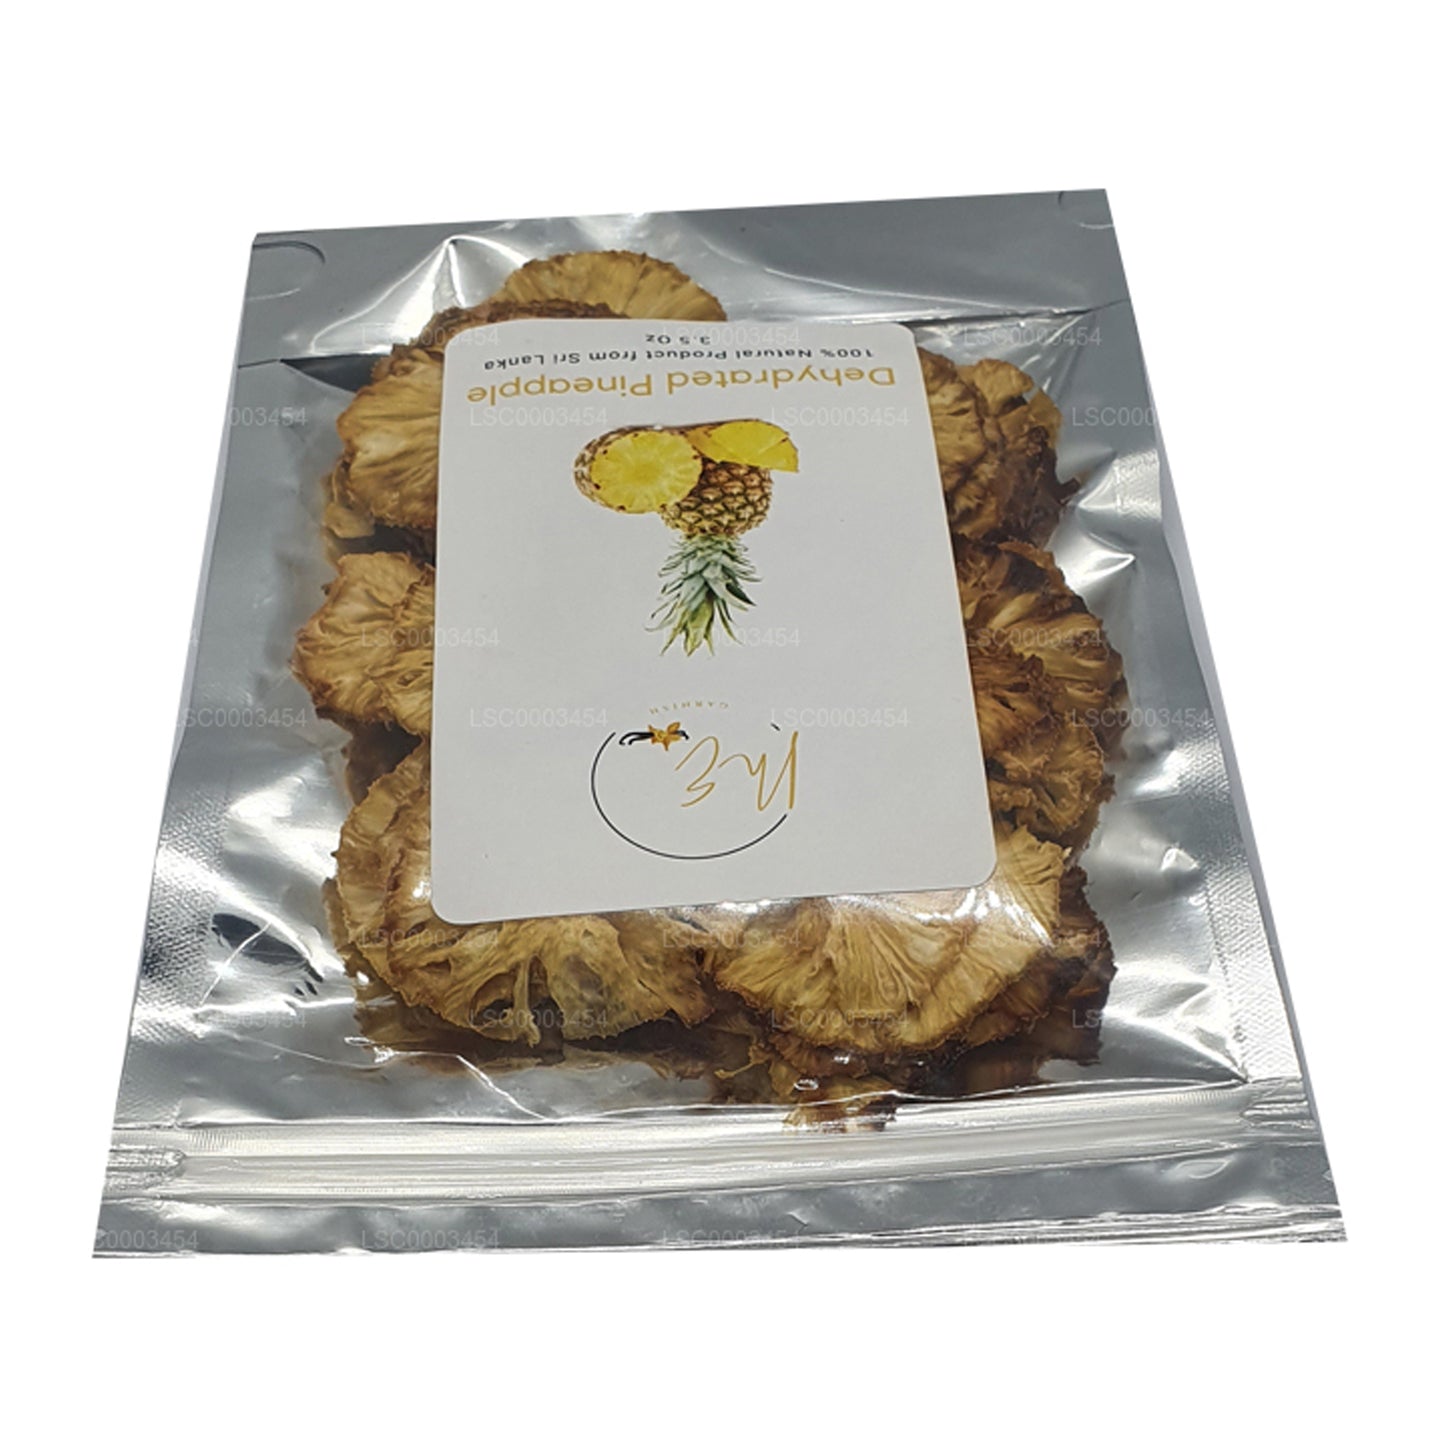 ME Dehydreret ananas (100g)